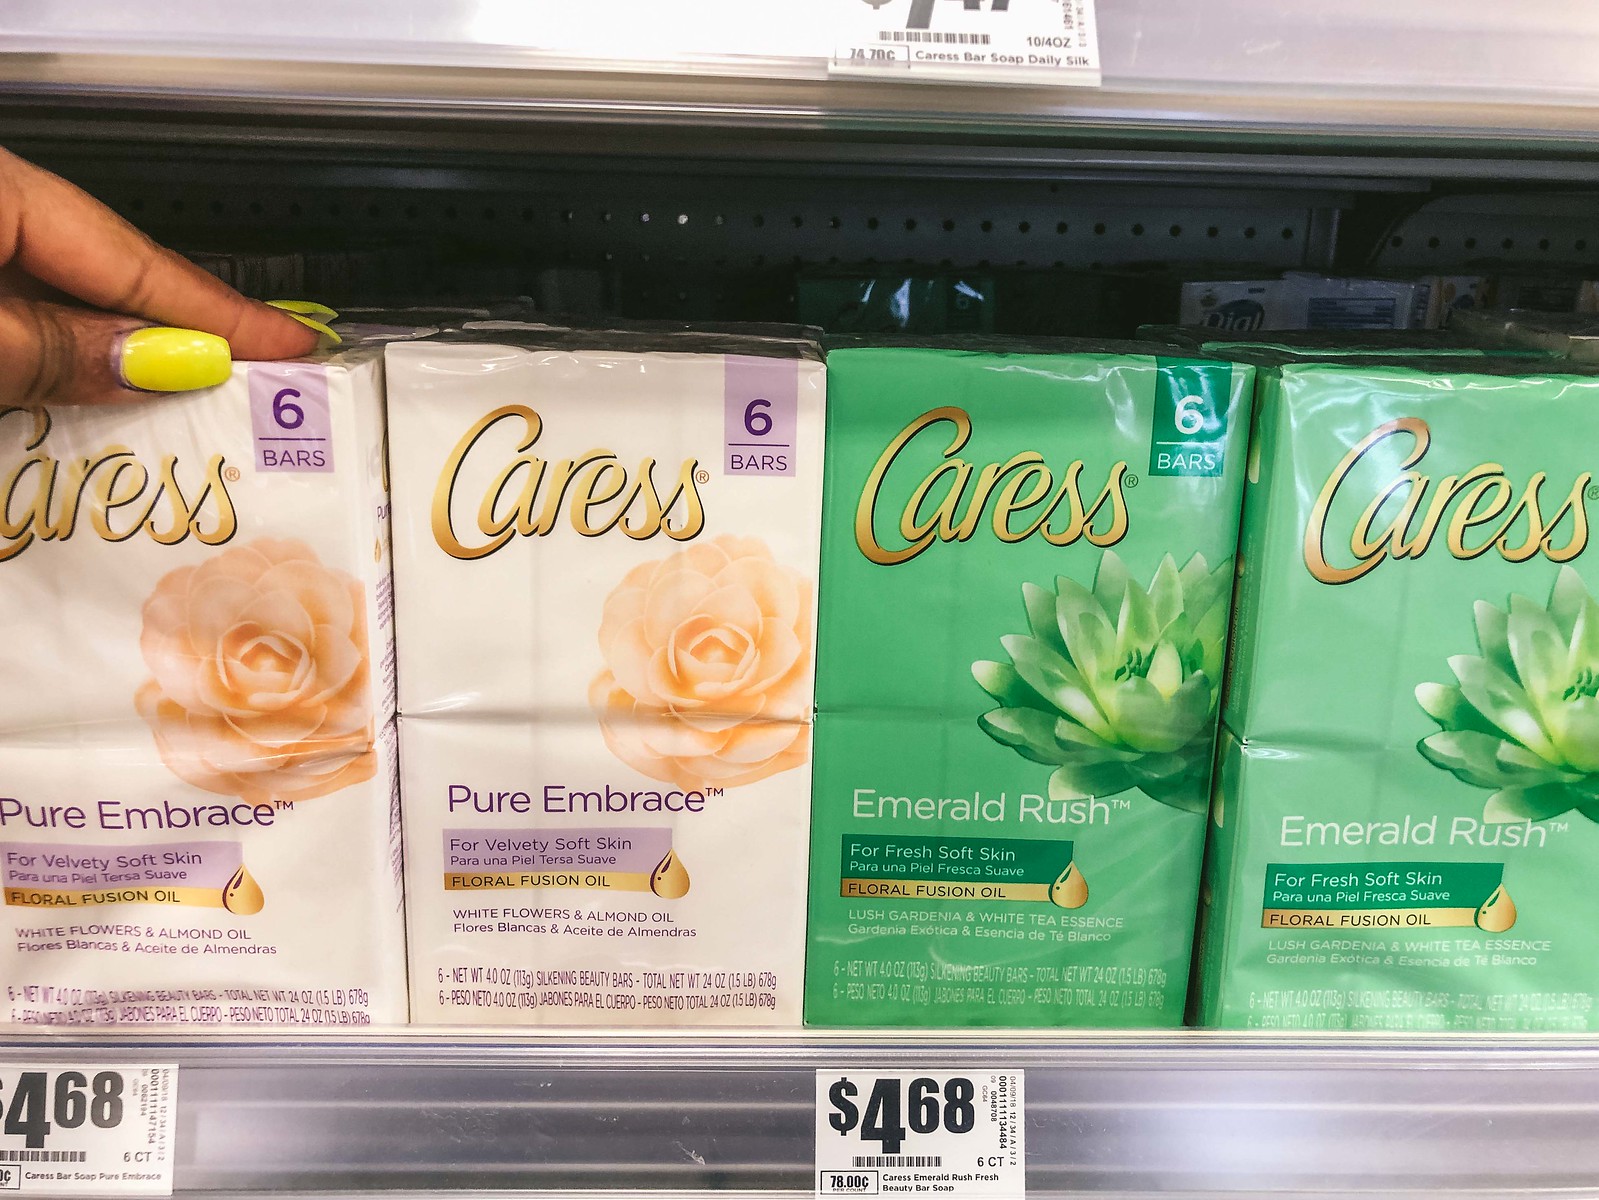 caress body silk products at h-e-b